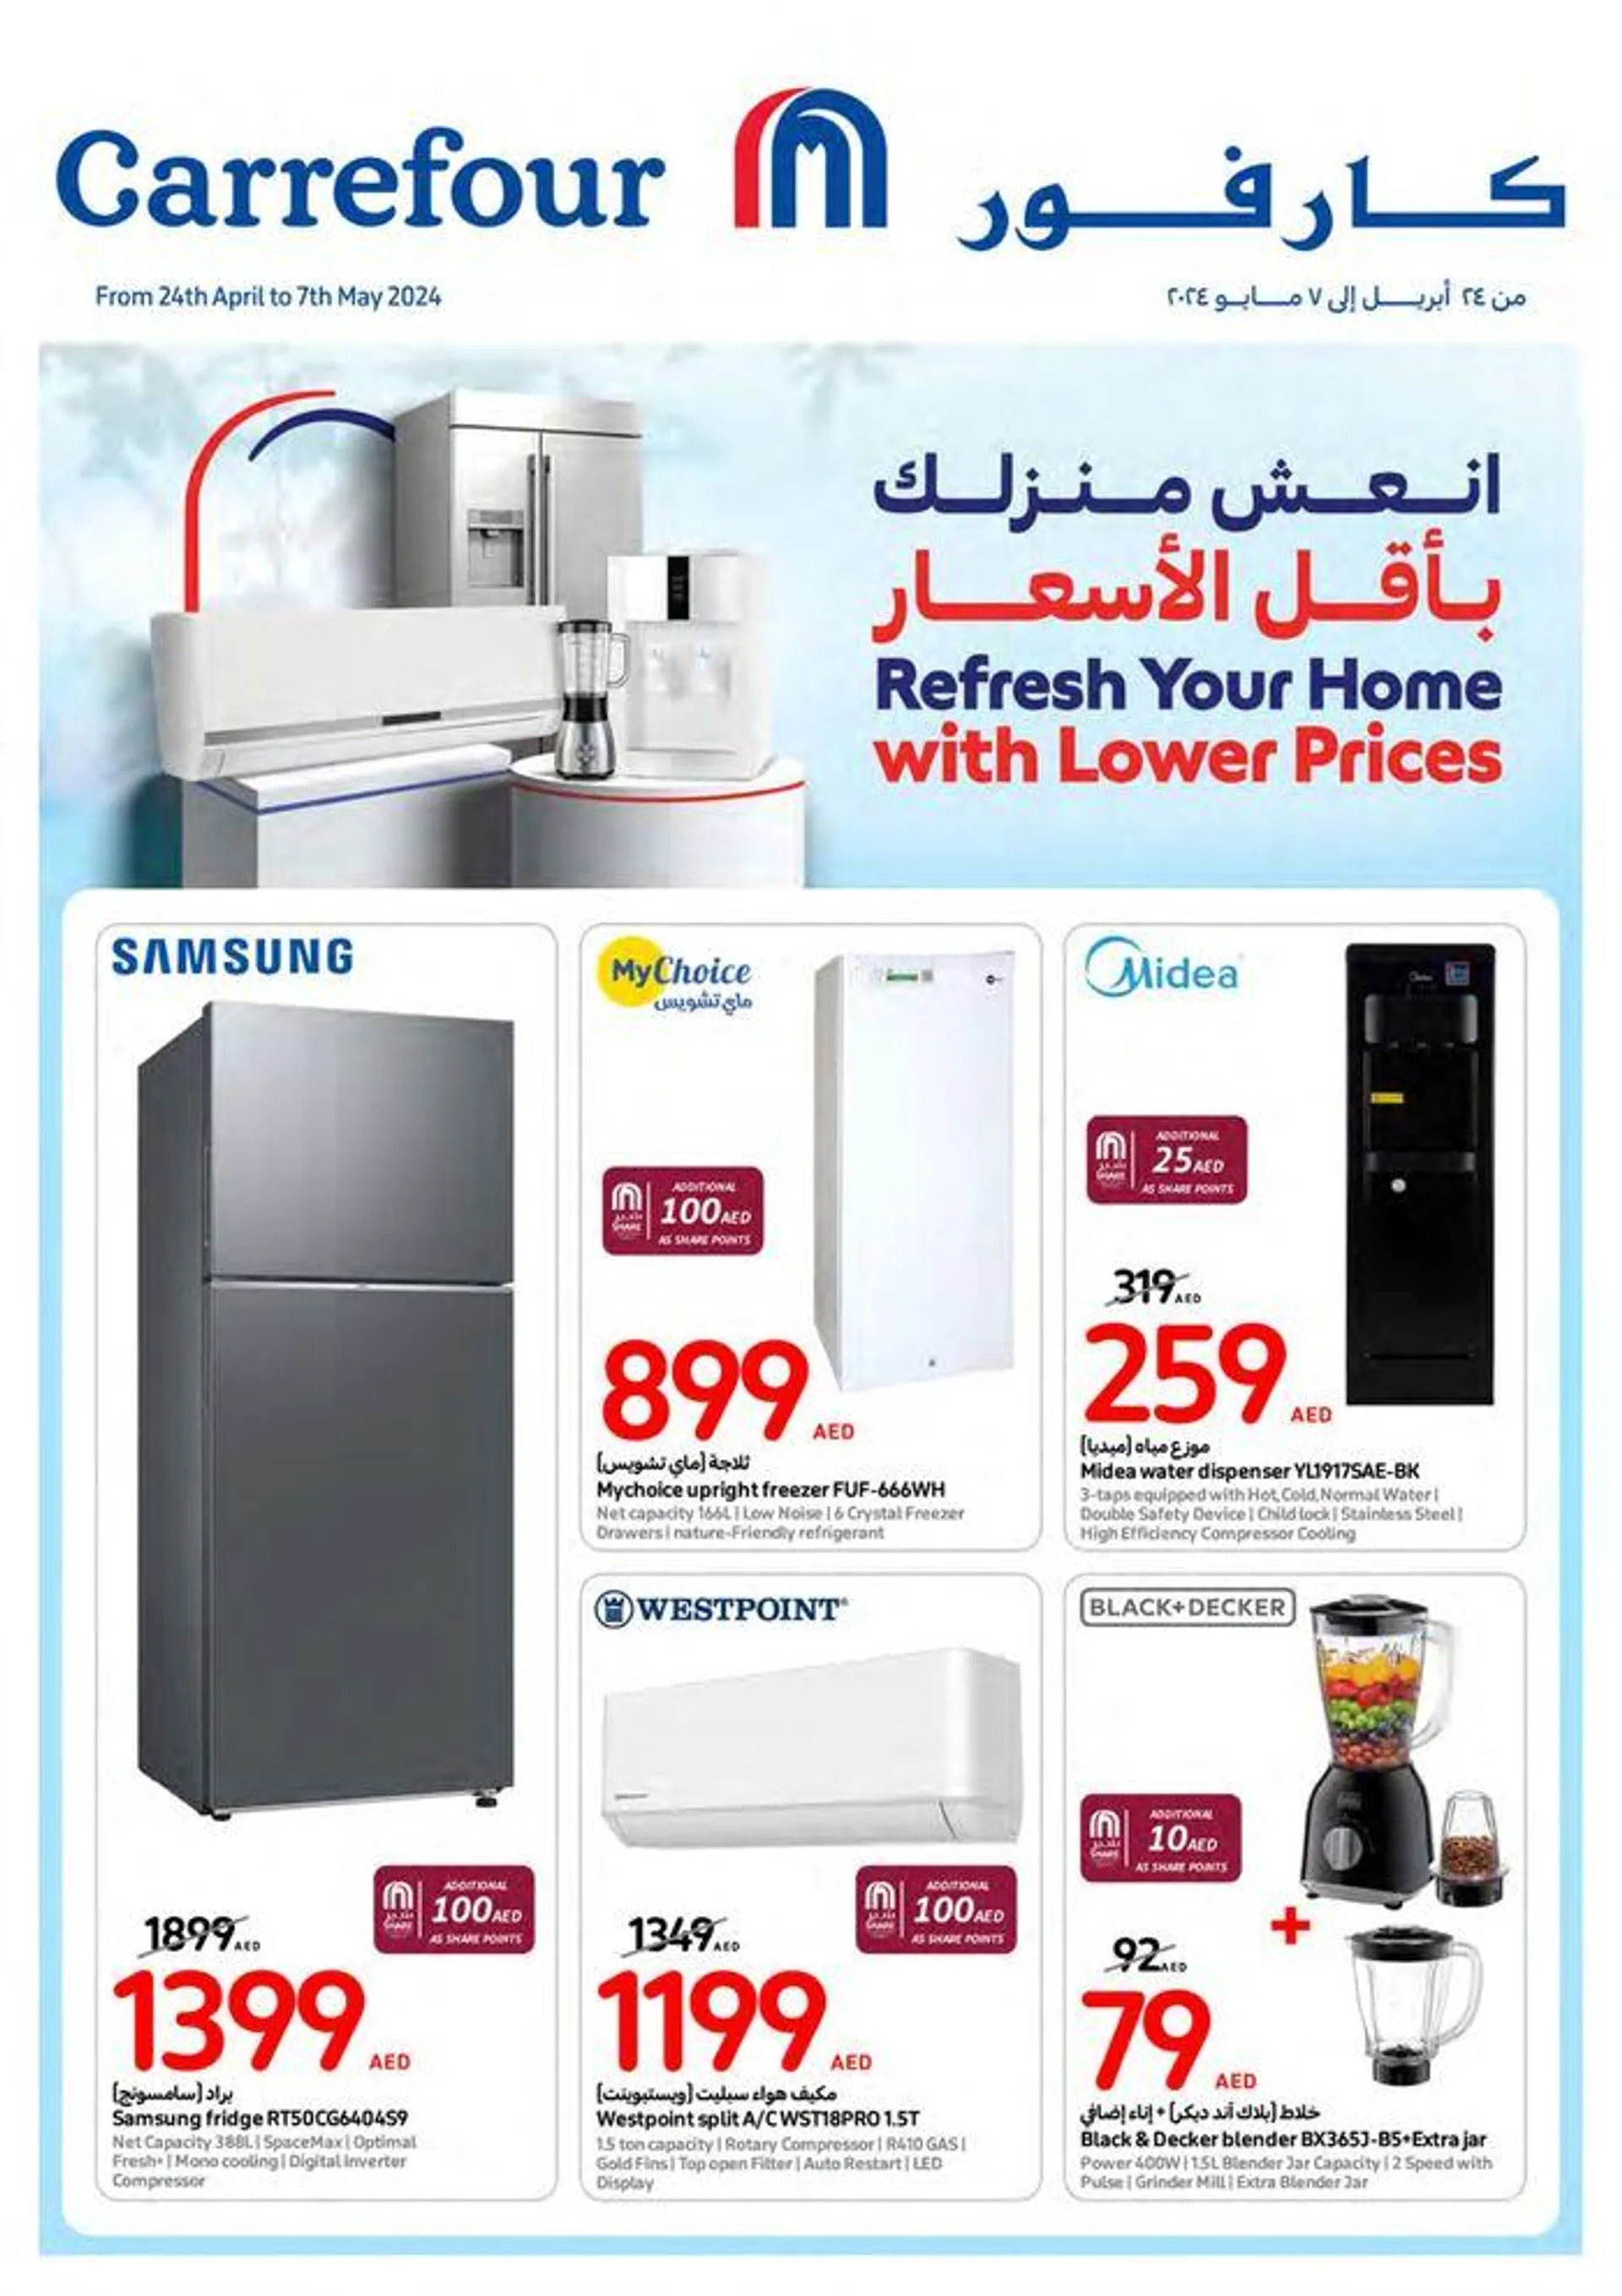 Carrefour Lower Prices! - 1